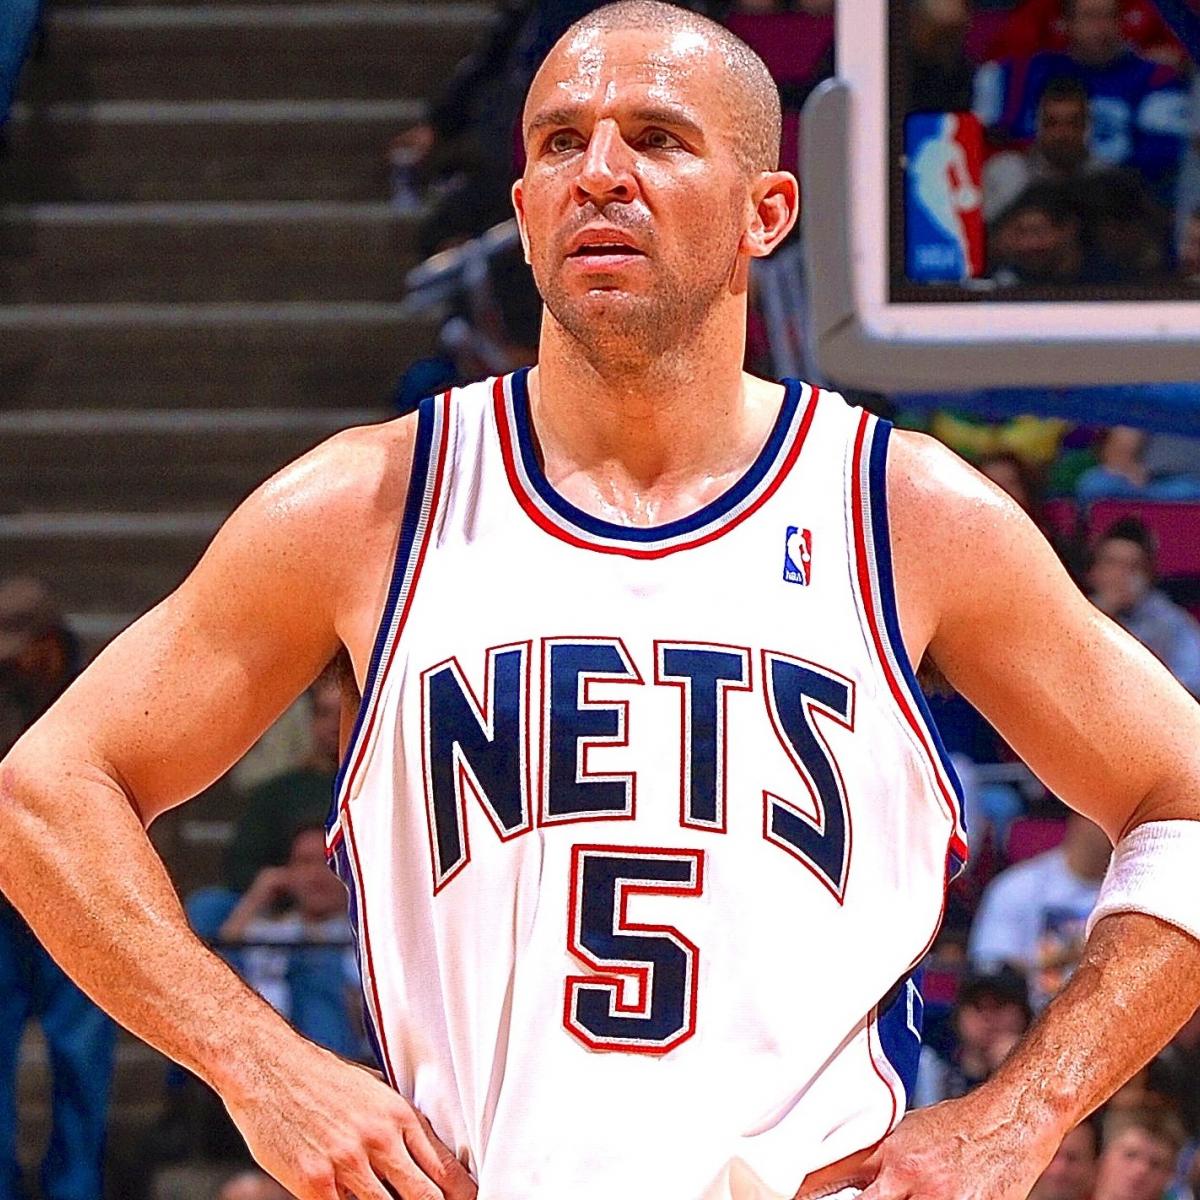 New Jersey Nets Jason Kidd looks up at the score board during the first  quarter against the Washington Wizards at the Verizon Center in Washington  on April 10, 2007. (UPI Photo/Kevin Dietsch